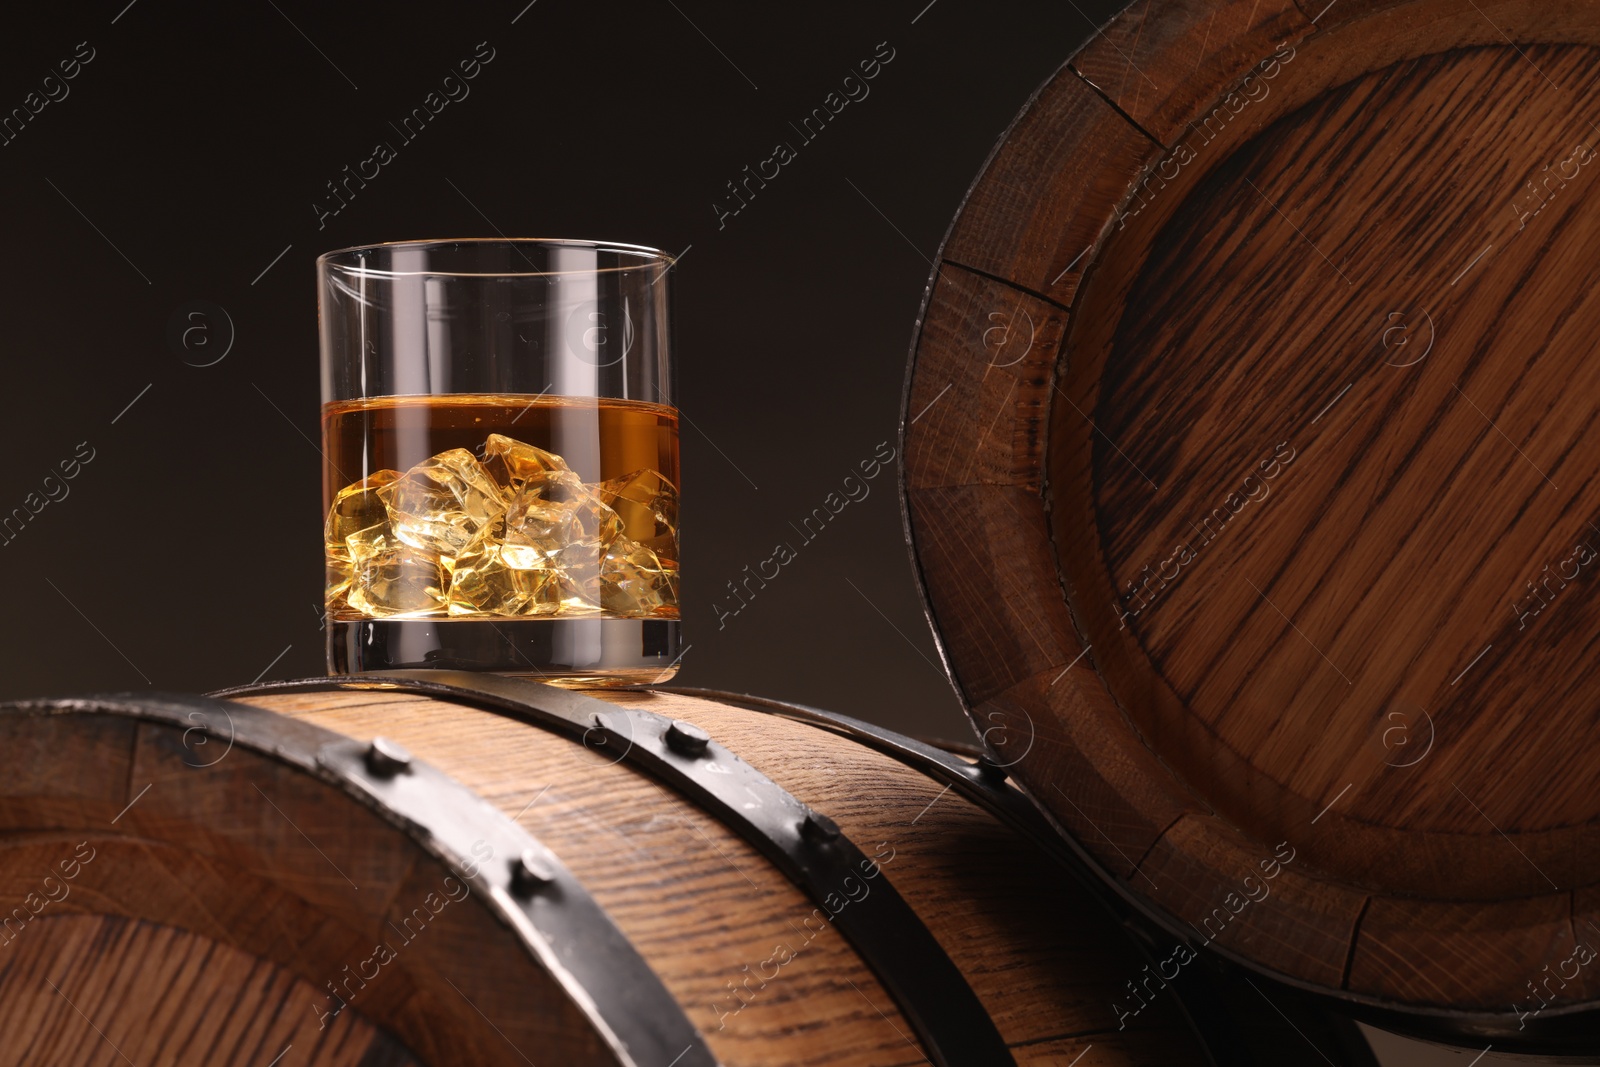 Photo of Whiskey with ice cubes in glass on wooden barrel against dark background